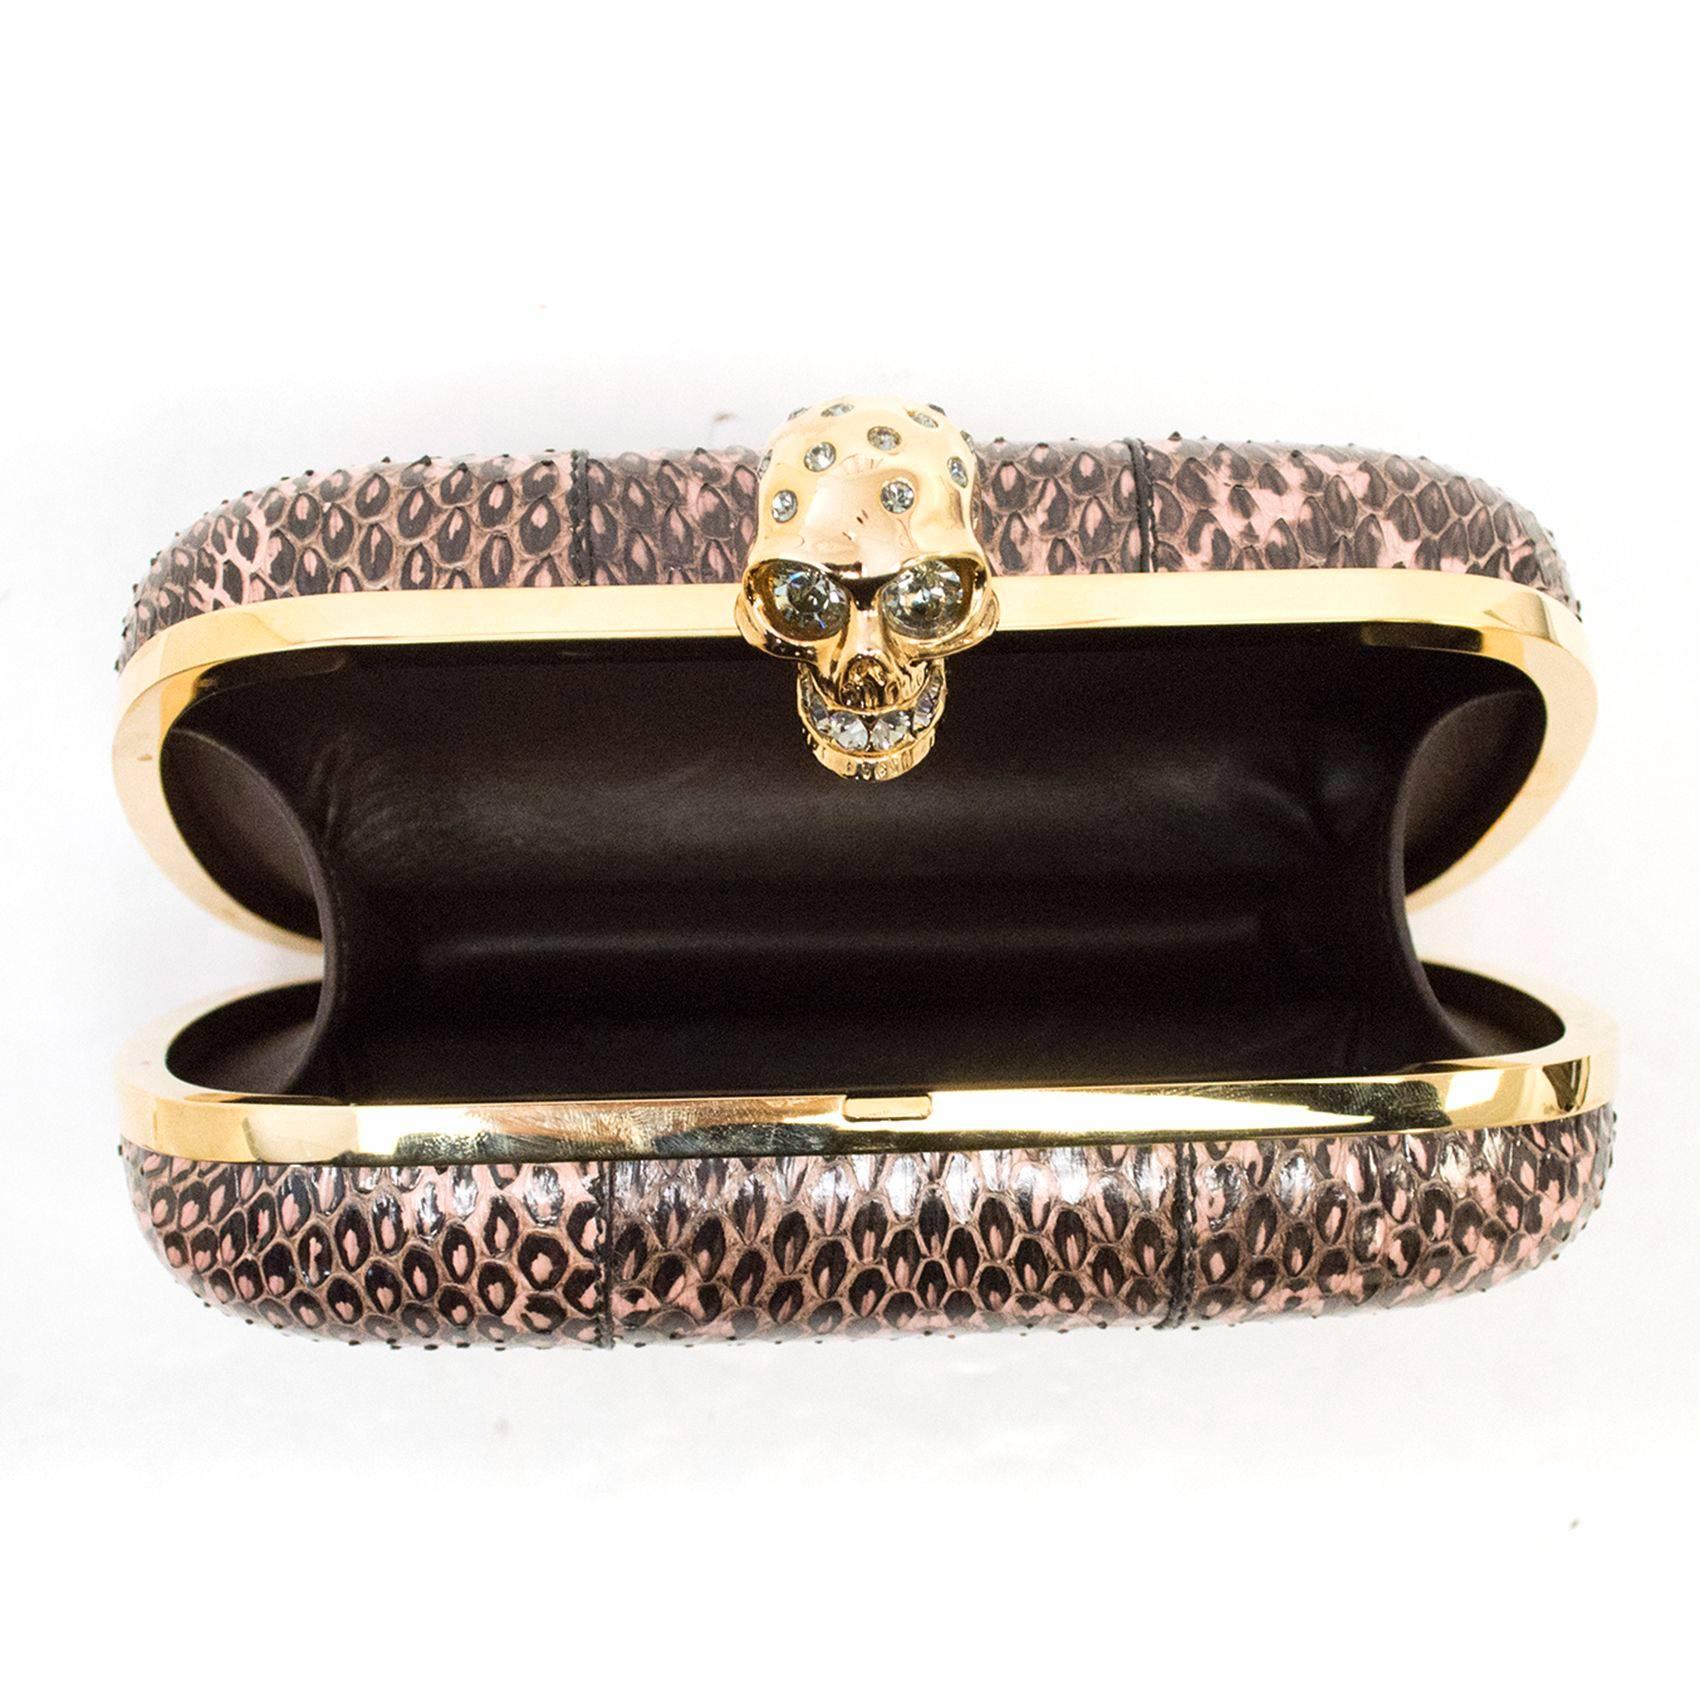 Alexander McQueen Pink And Black Python 'Skull' Box Clutch For Sale 3